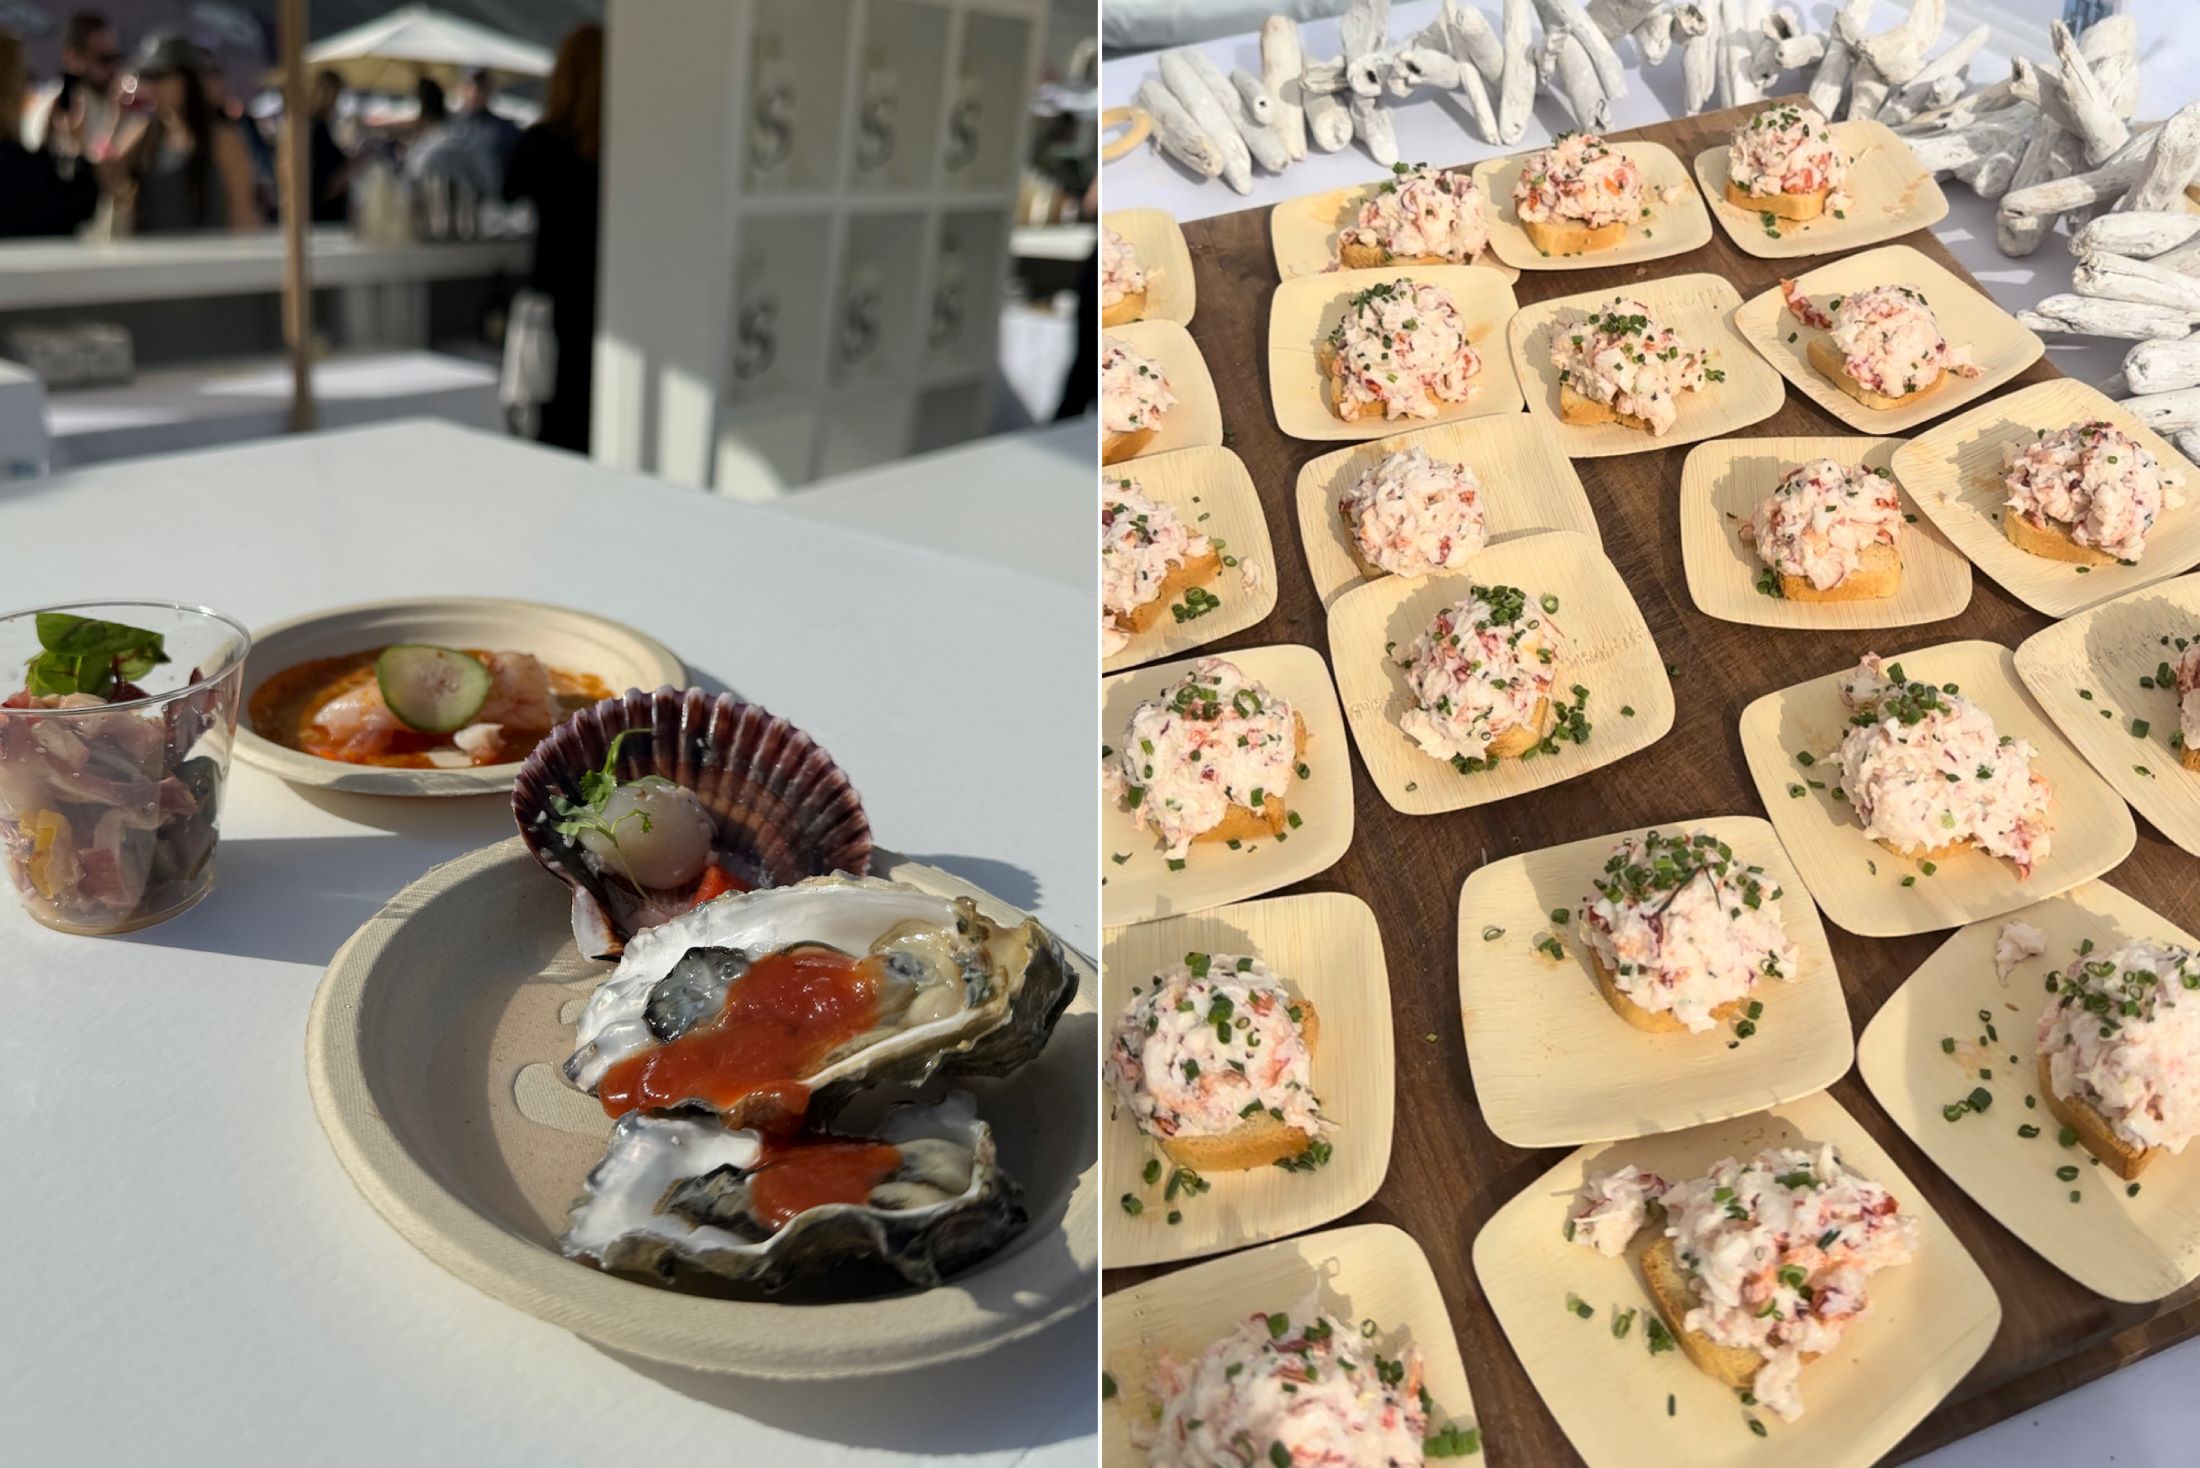 An image of seafood from the seafood village at the festival.